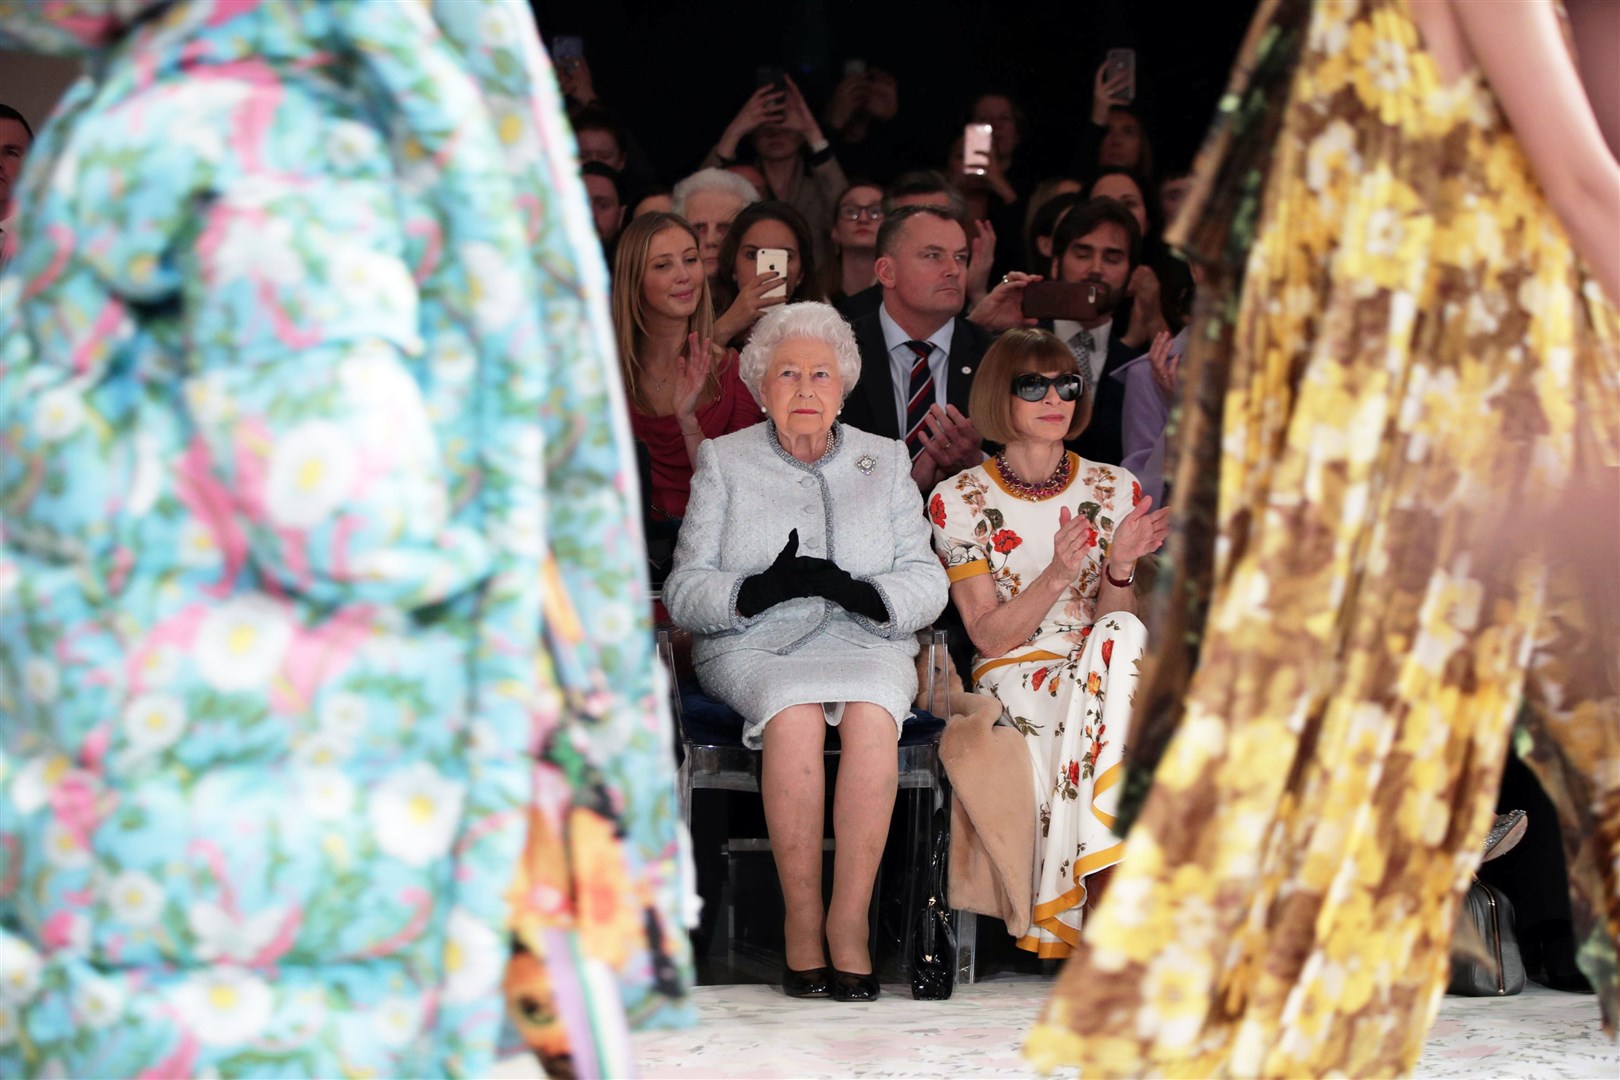 The Queen sits next to Dame Anna Wintour at London Fashion Week in 2018 (Yui Mok/PA)